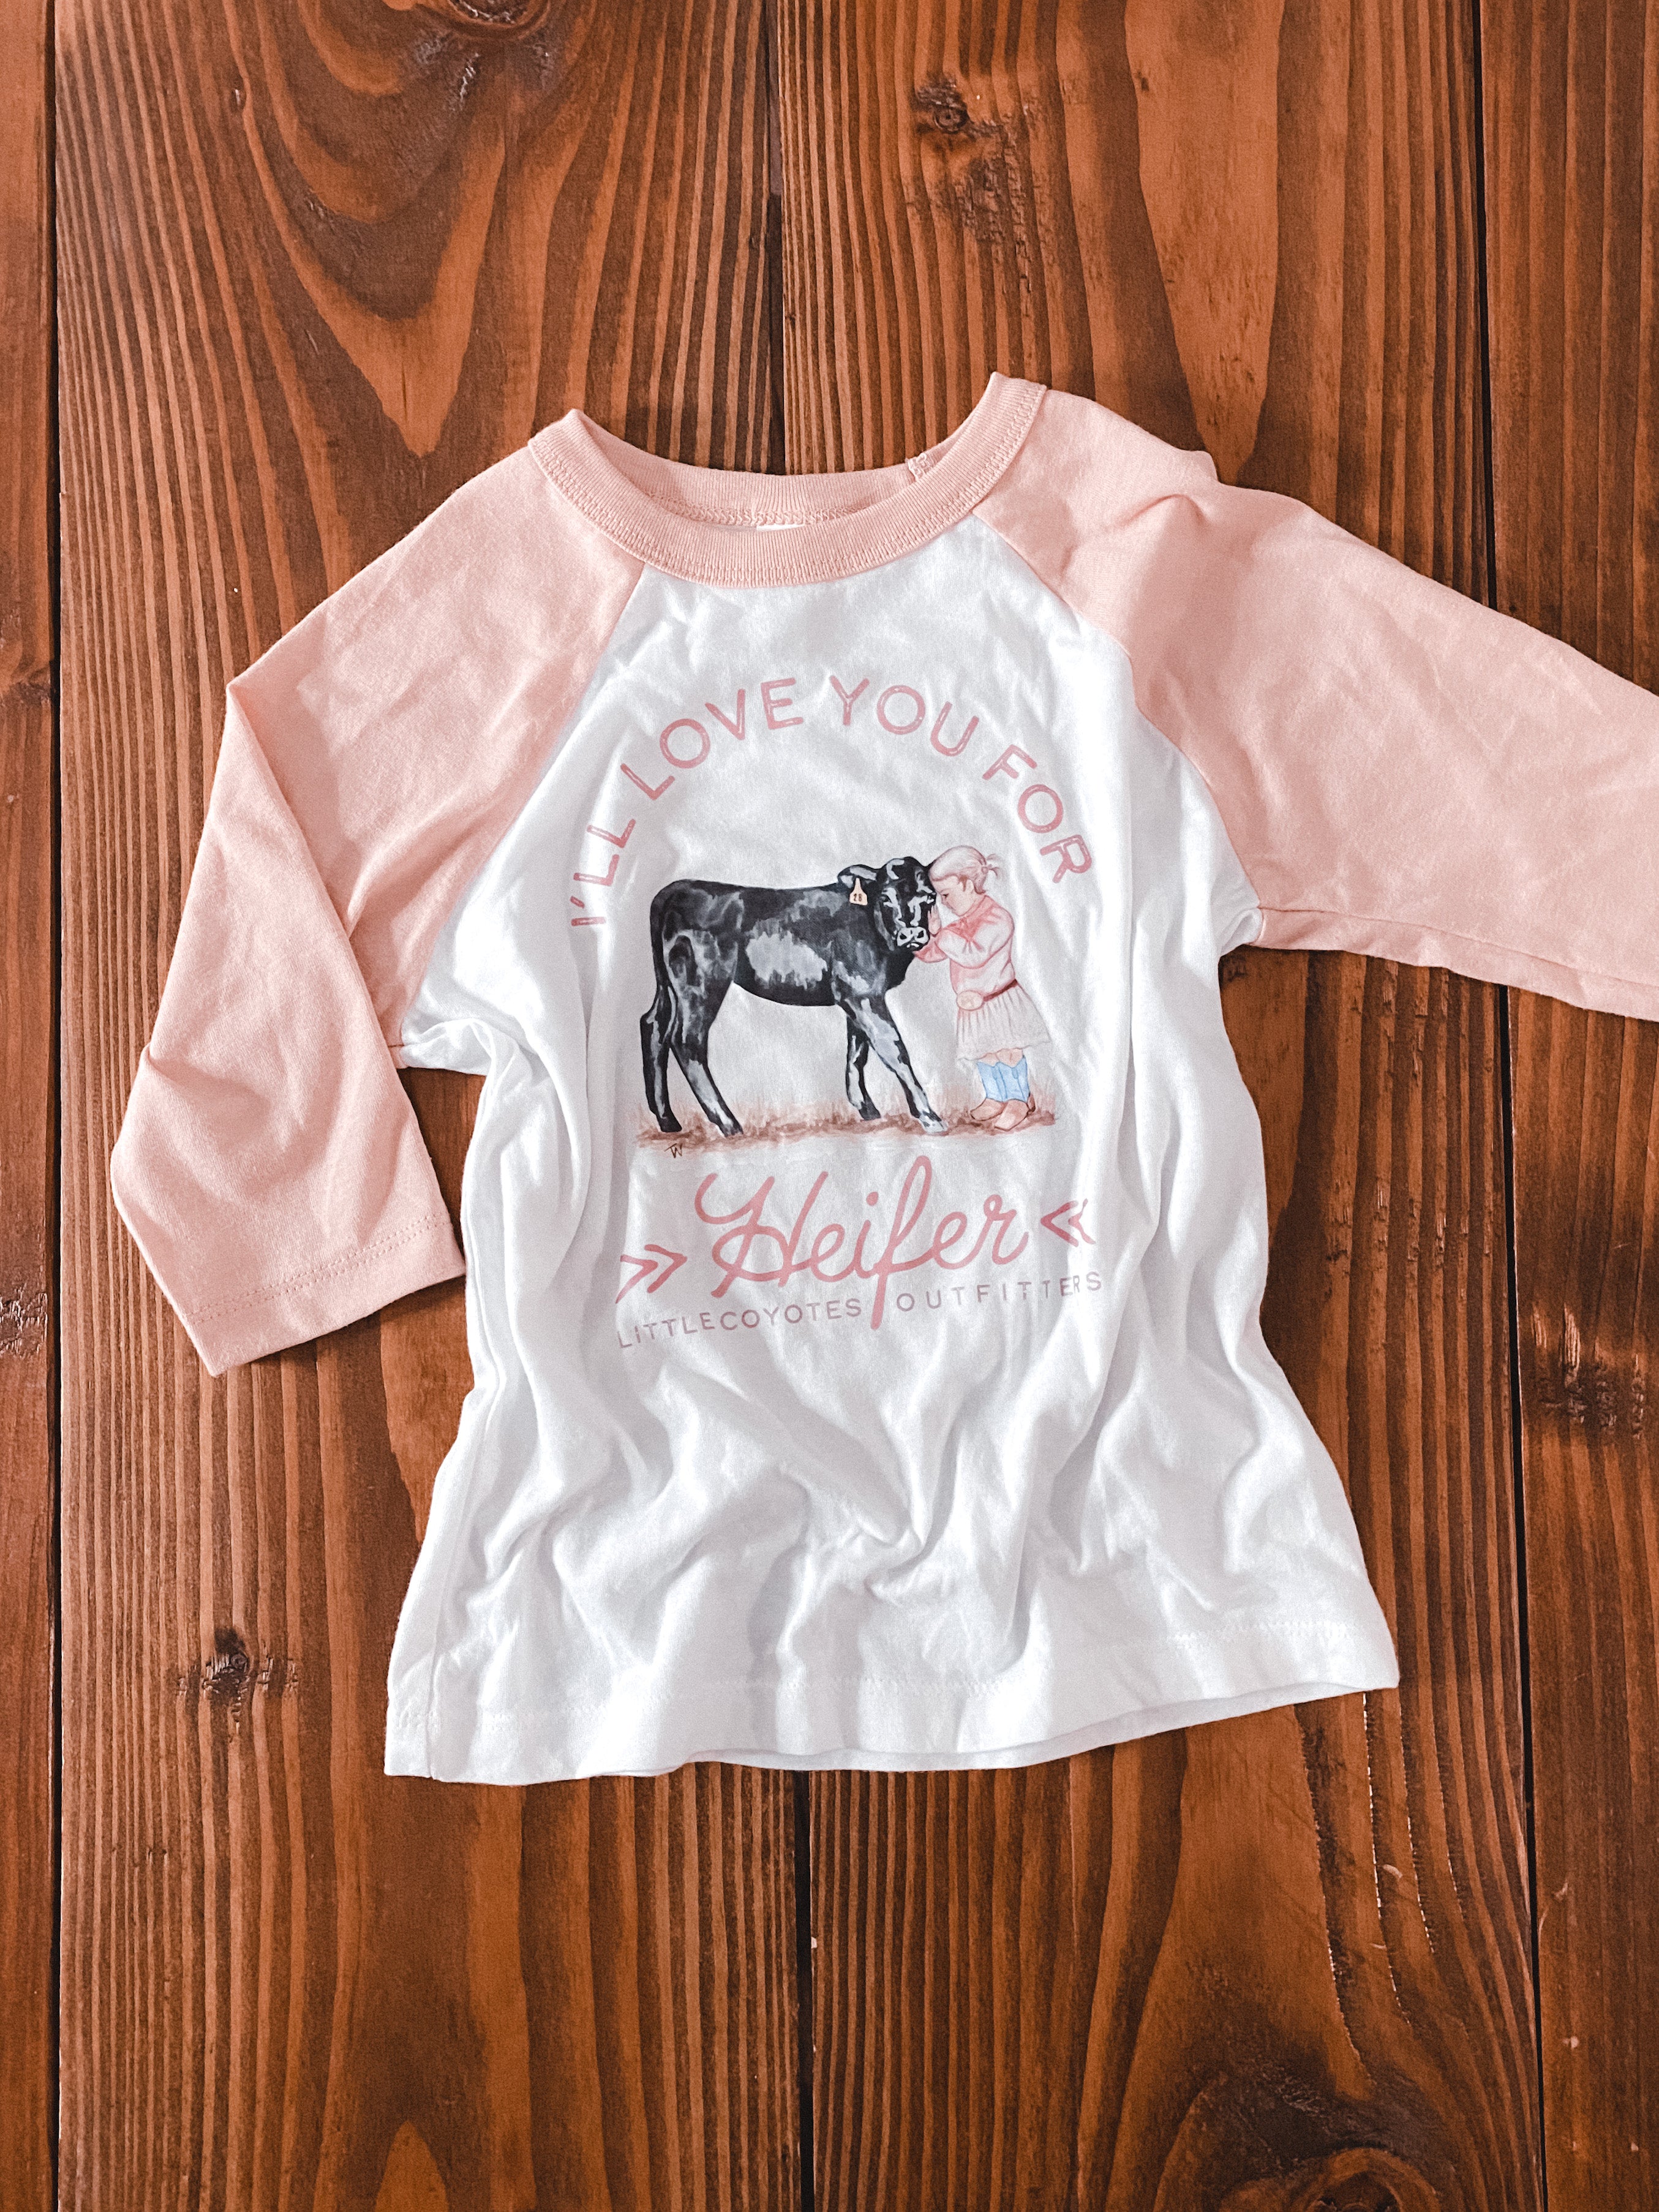 "I'll Love You For Heifer" Kids Graphic Raglan Tee in Peach and White